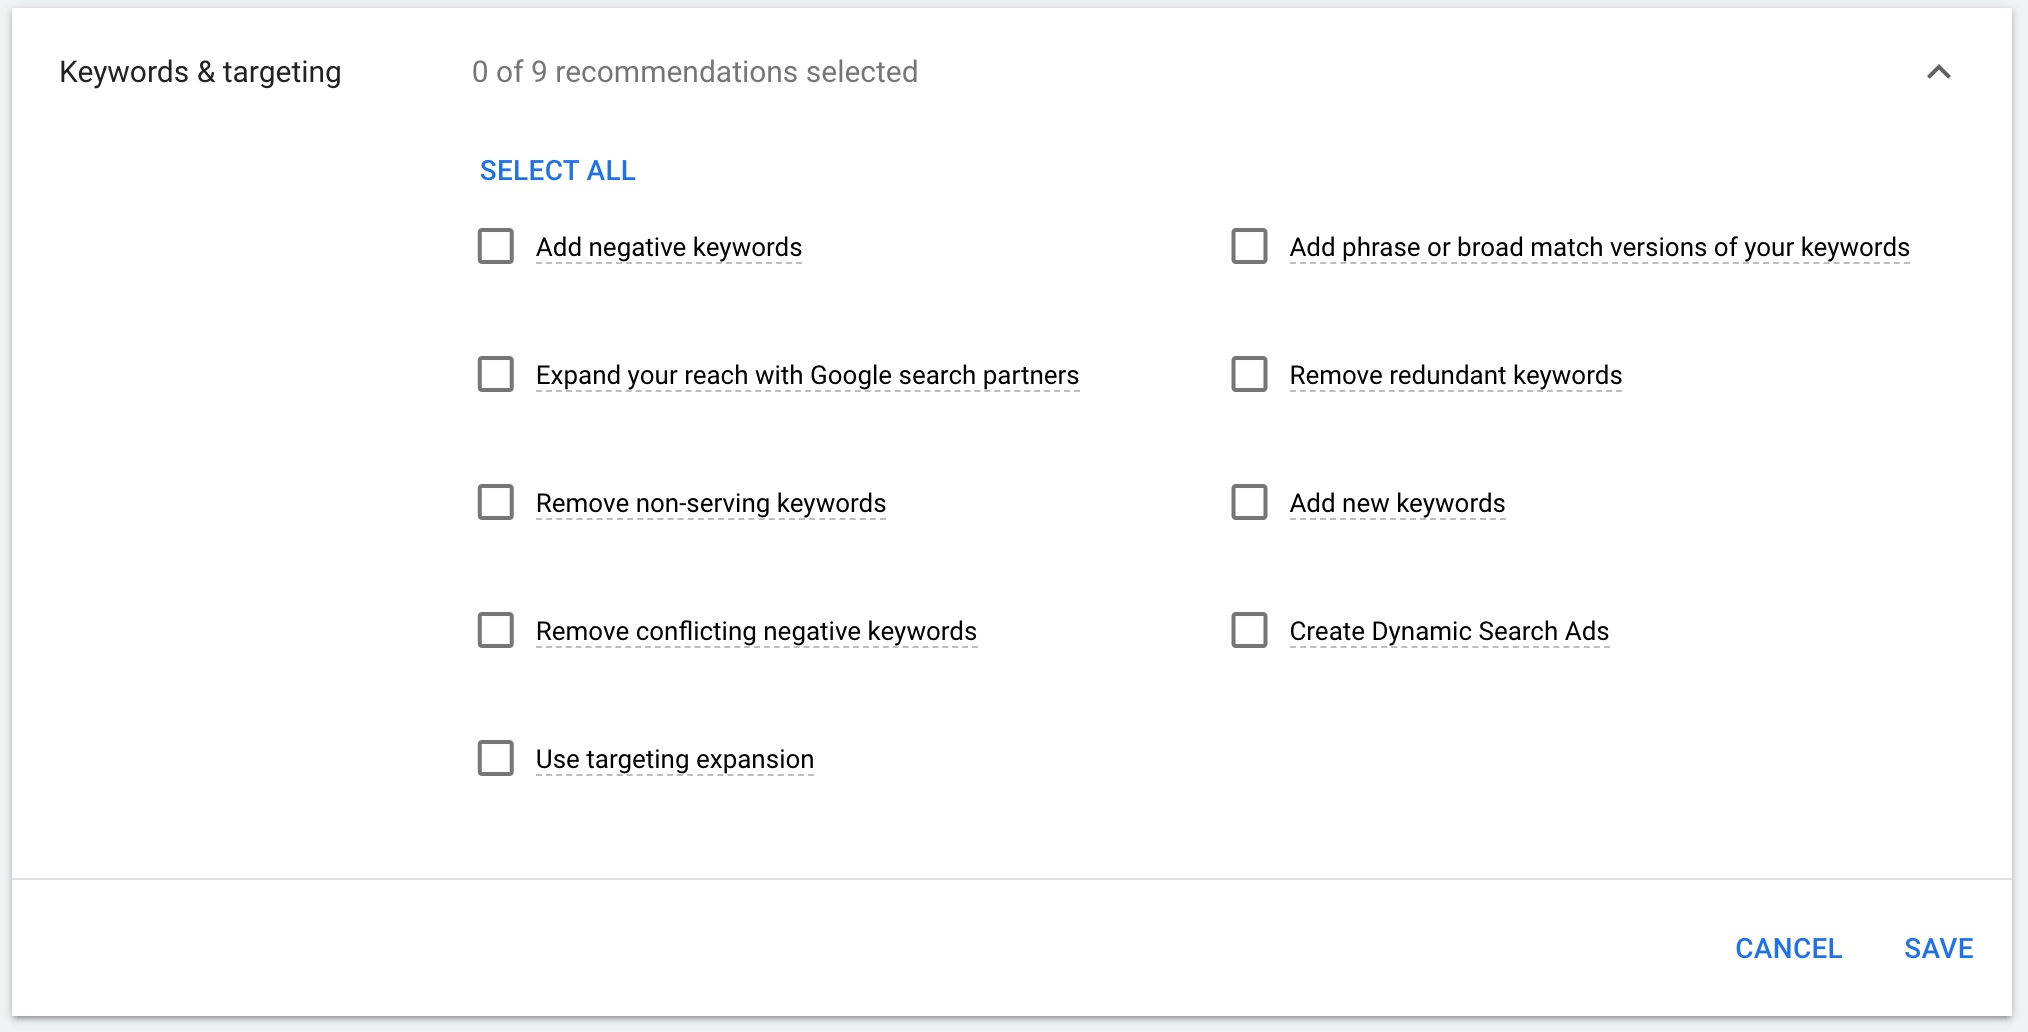 Recommendations for keywords and targeting.